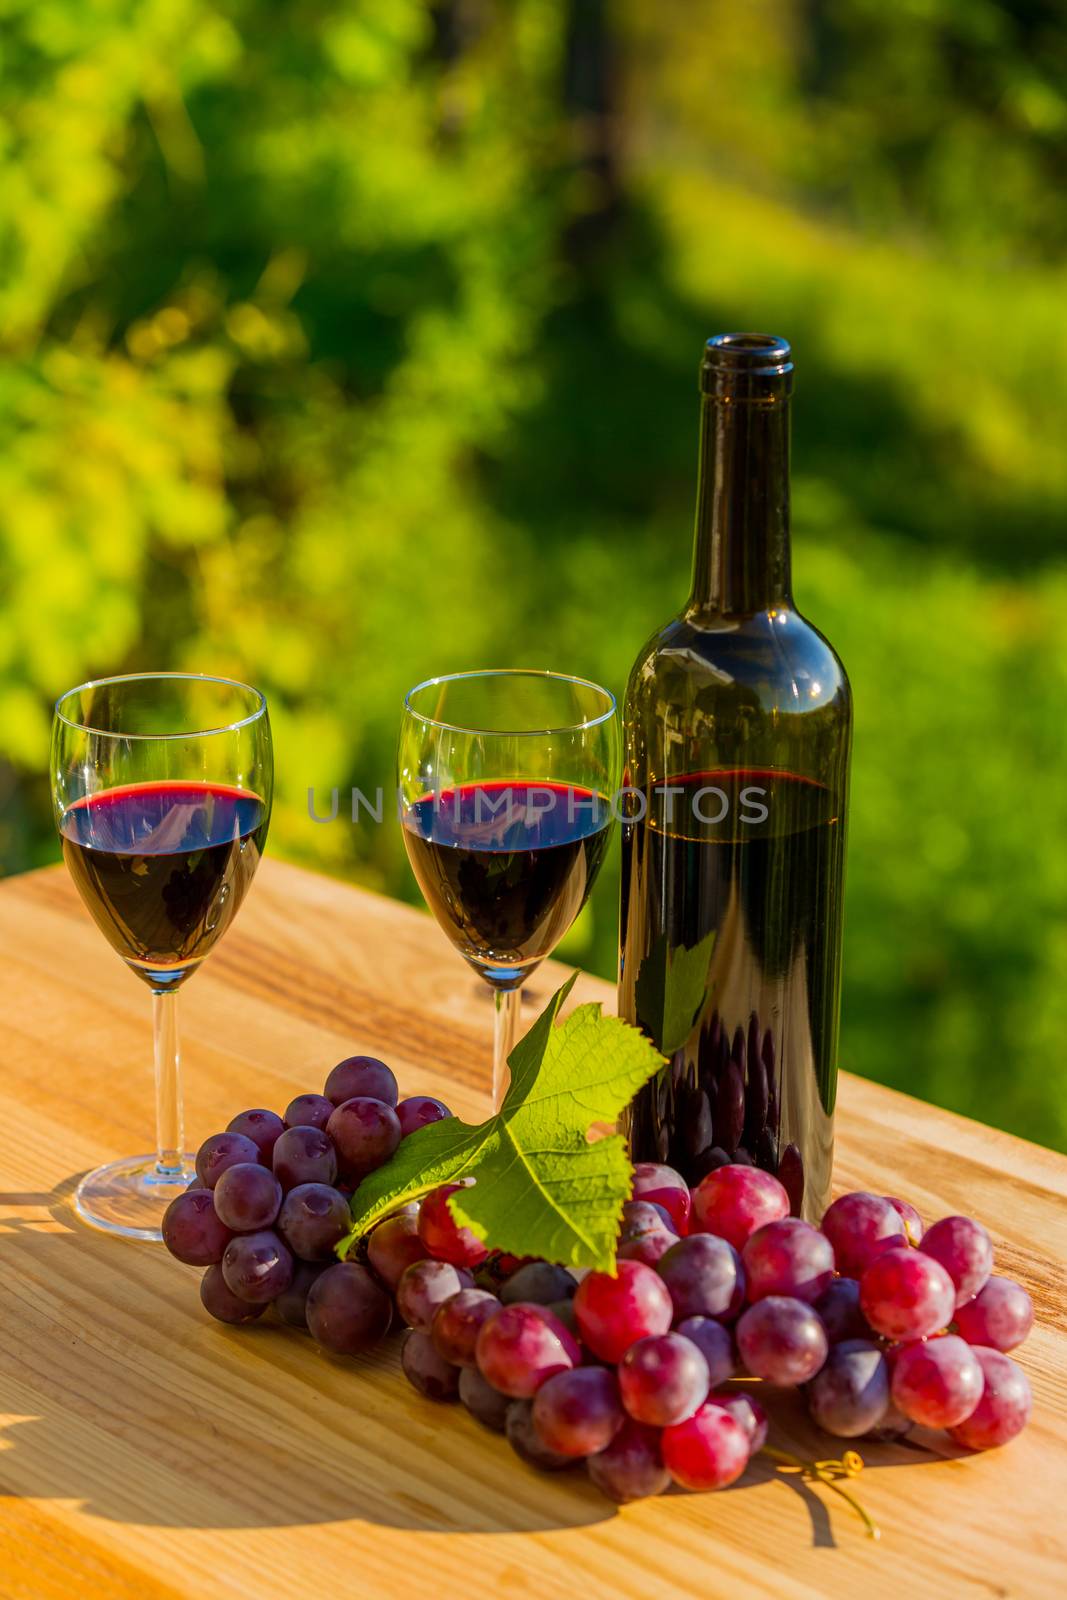 wine bottle and grapes on wooden table, outdoor